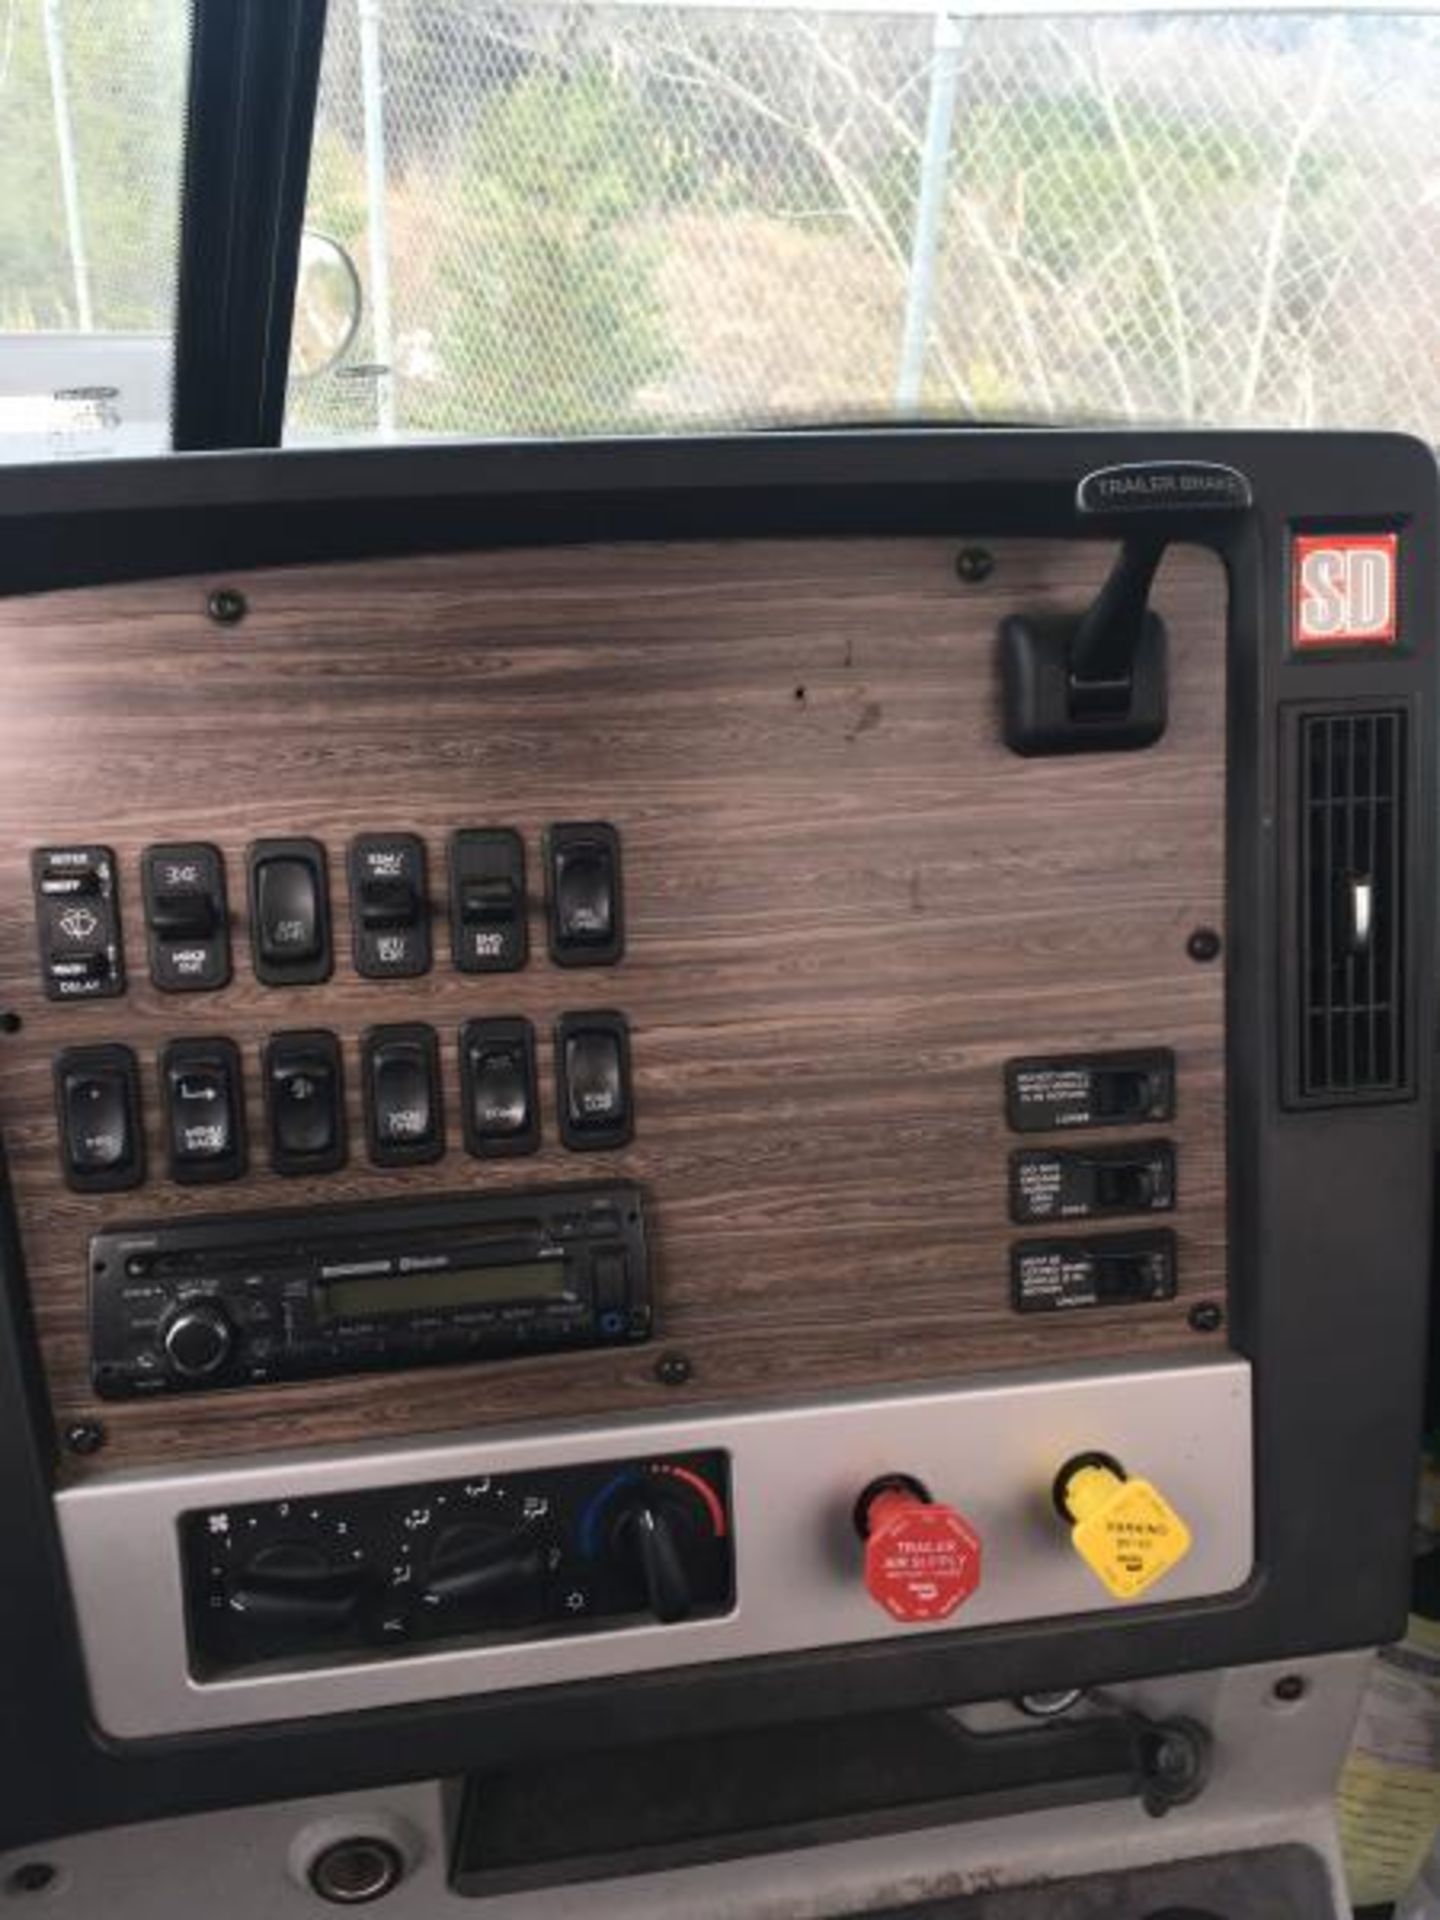 2017 Freightliner 122SD, 167,909 Miles - Image 20 of 28